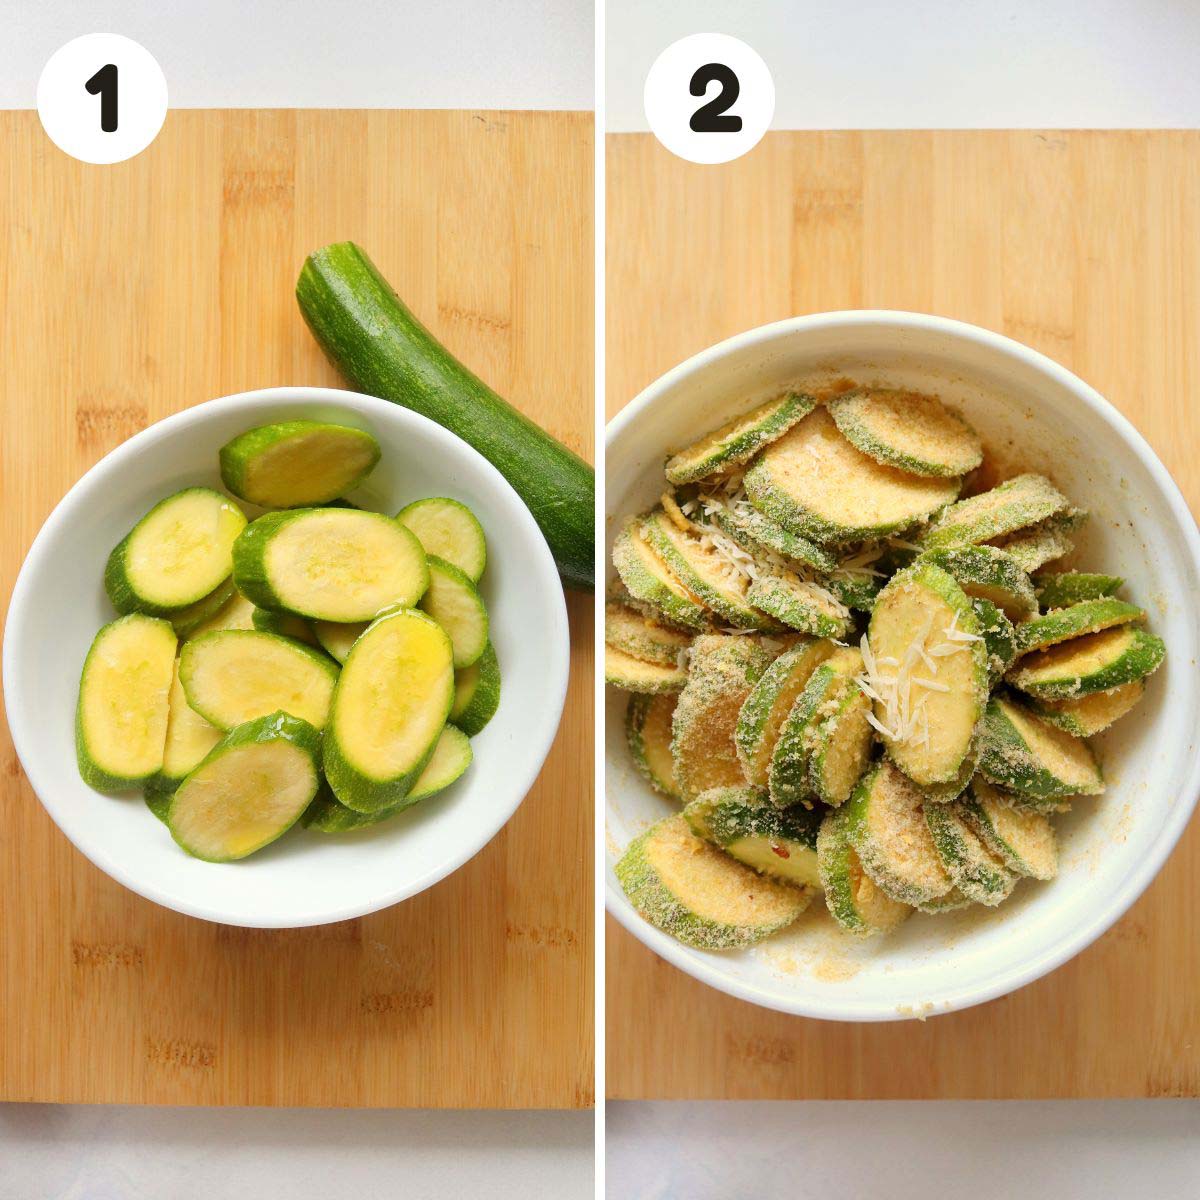 Steps to make the zucchini chips.